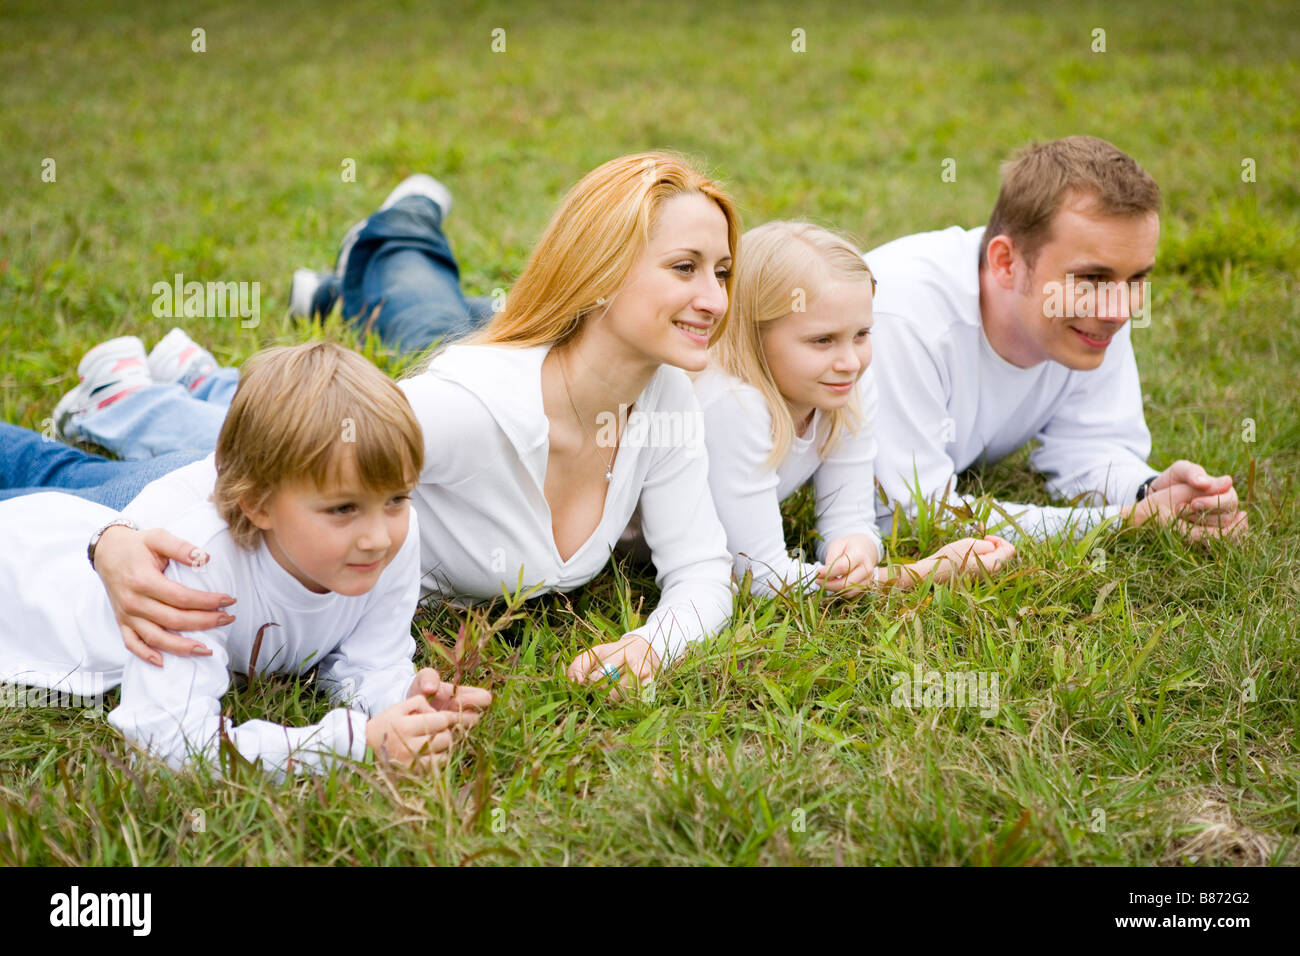 Family lying prone on grass smiling side view Stock Photo